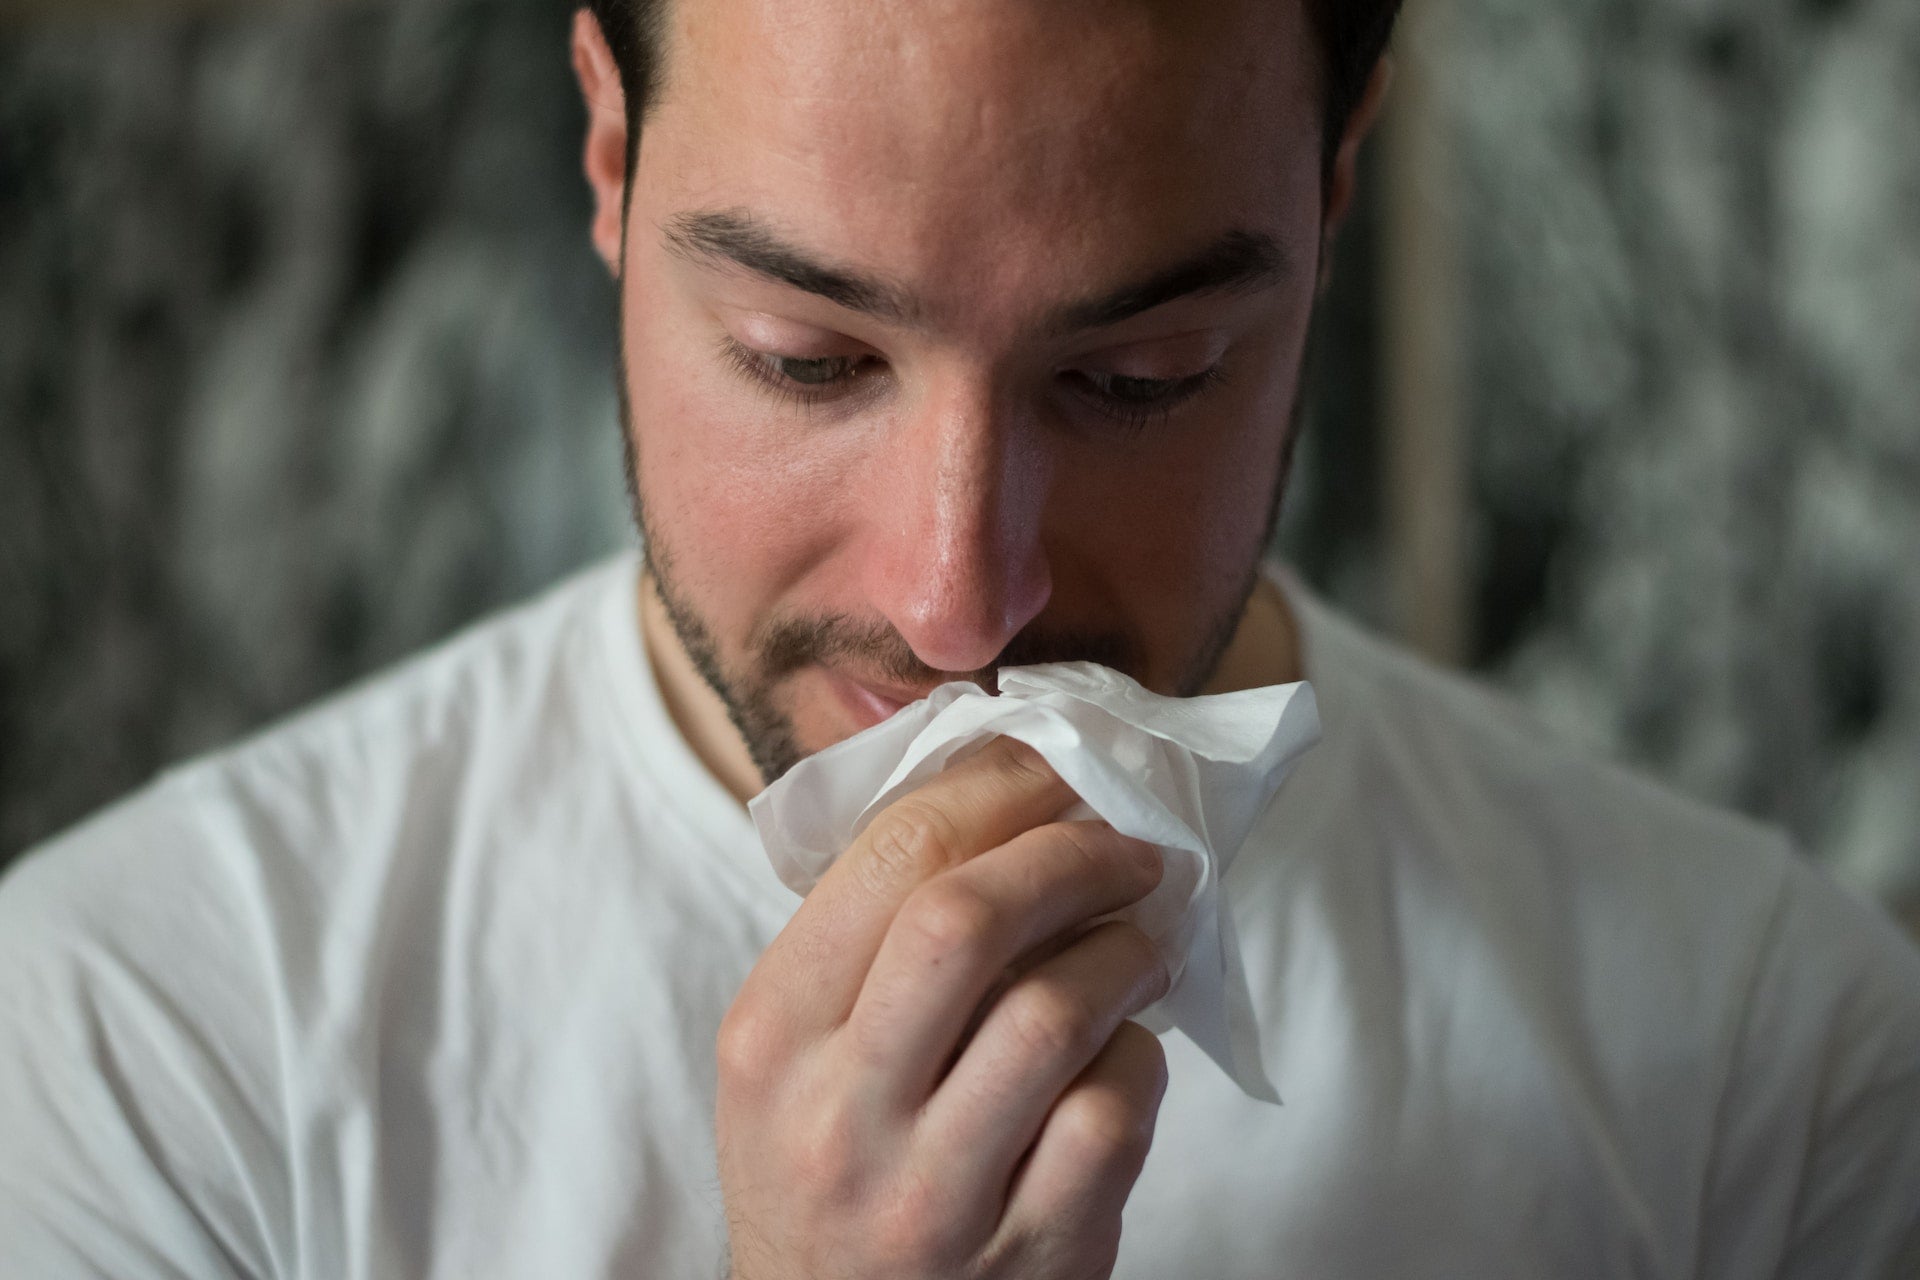 Can sneezing be related to poor indoor air quality?